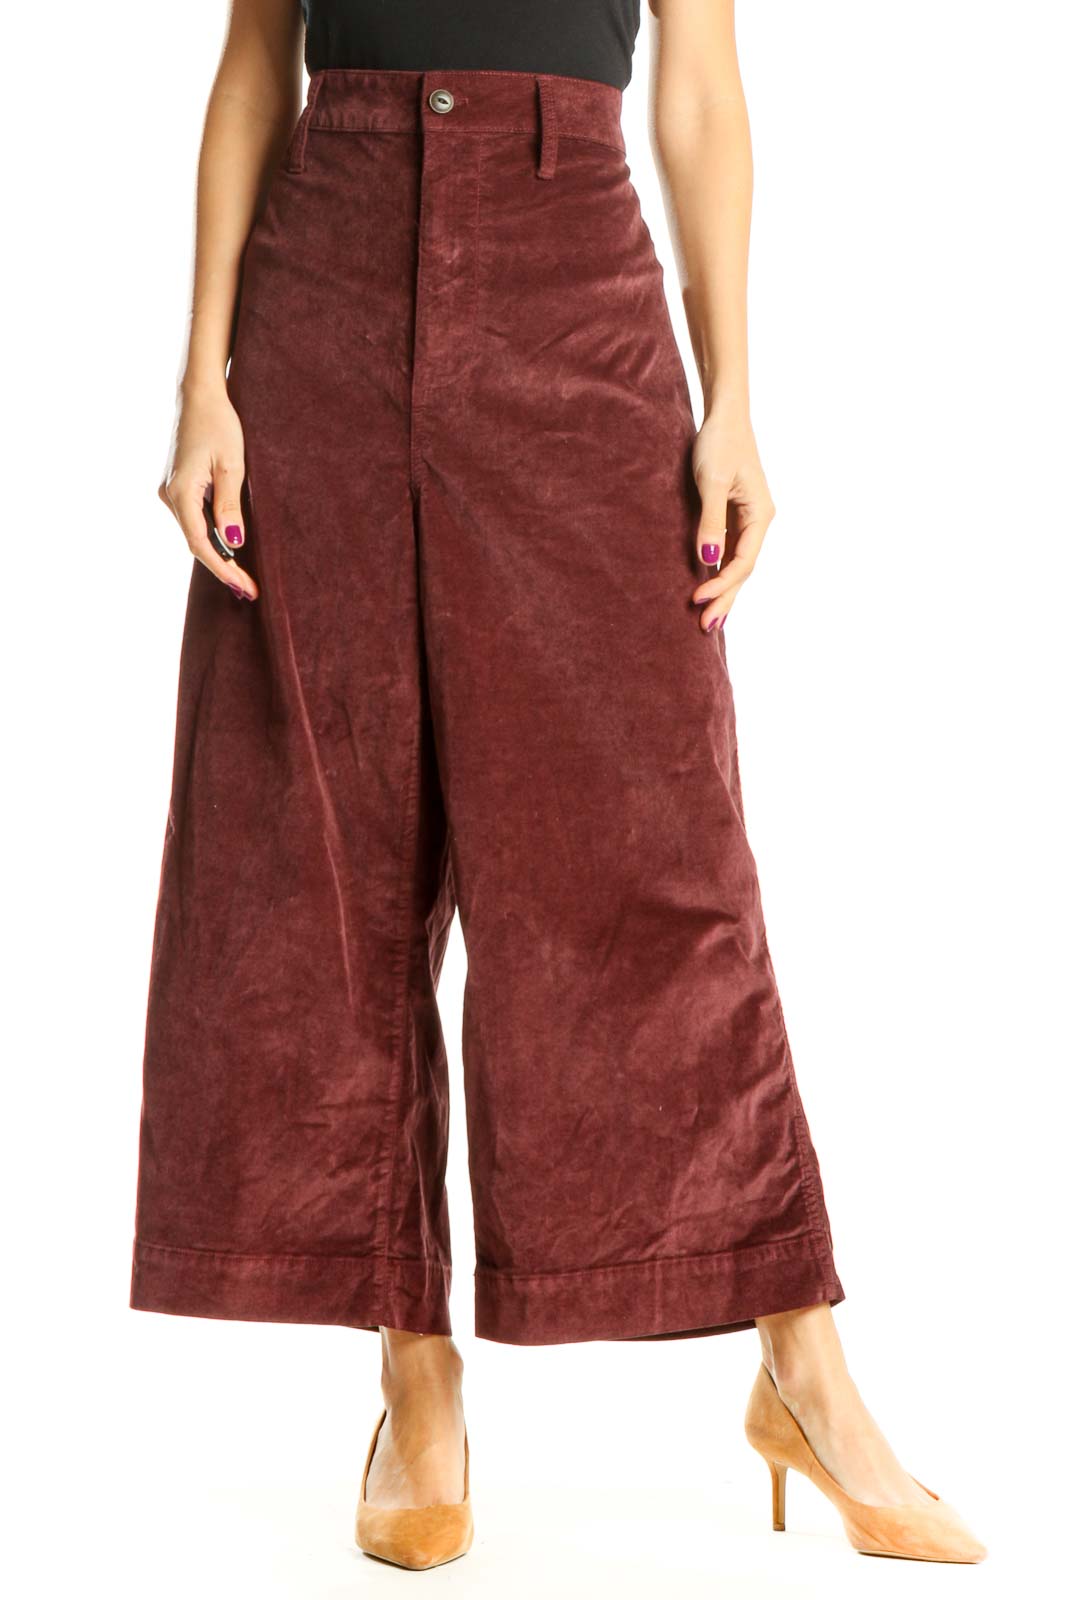 Red Textured Chic Palazzo Pants Front